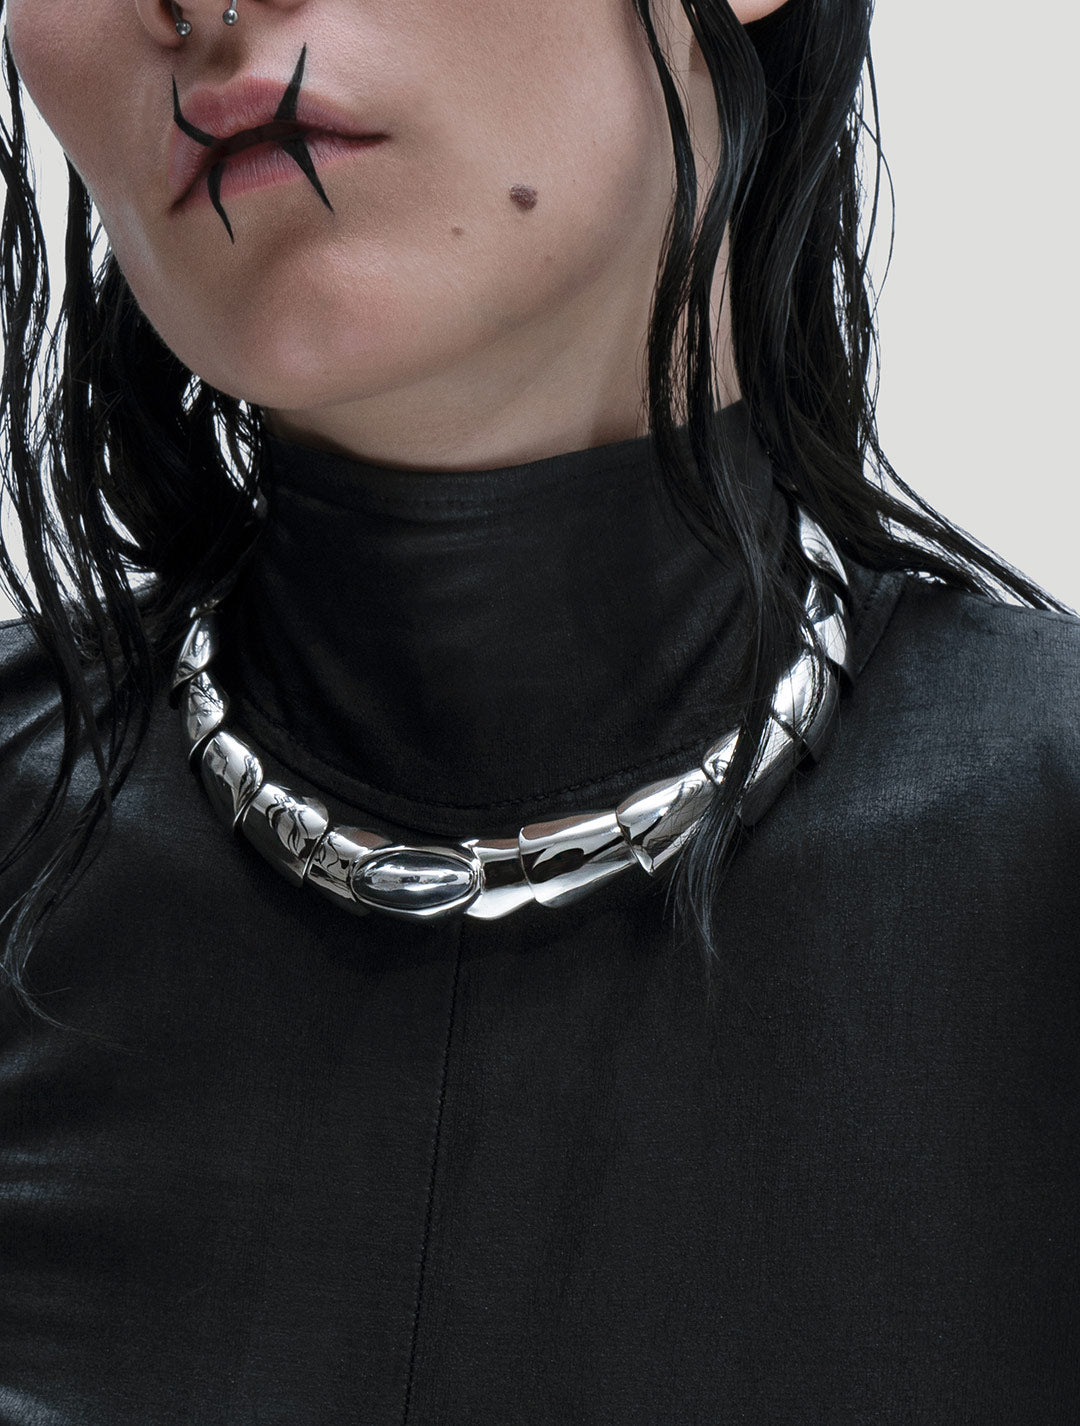 Armadillo Tech Choker by Costume Therapy